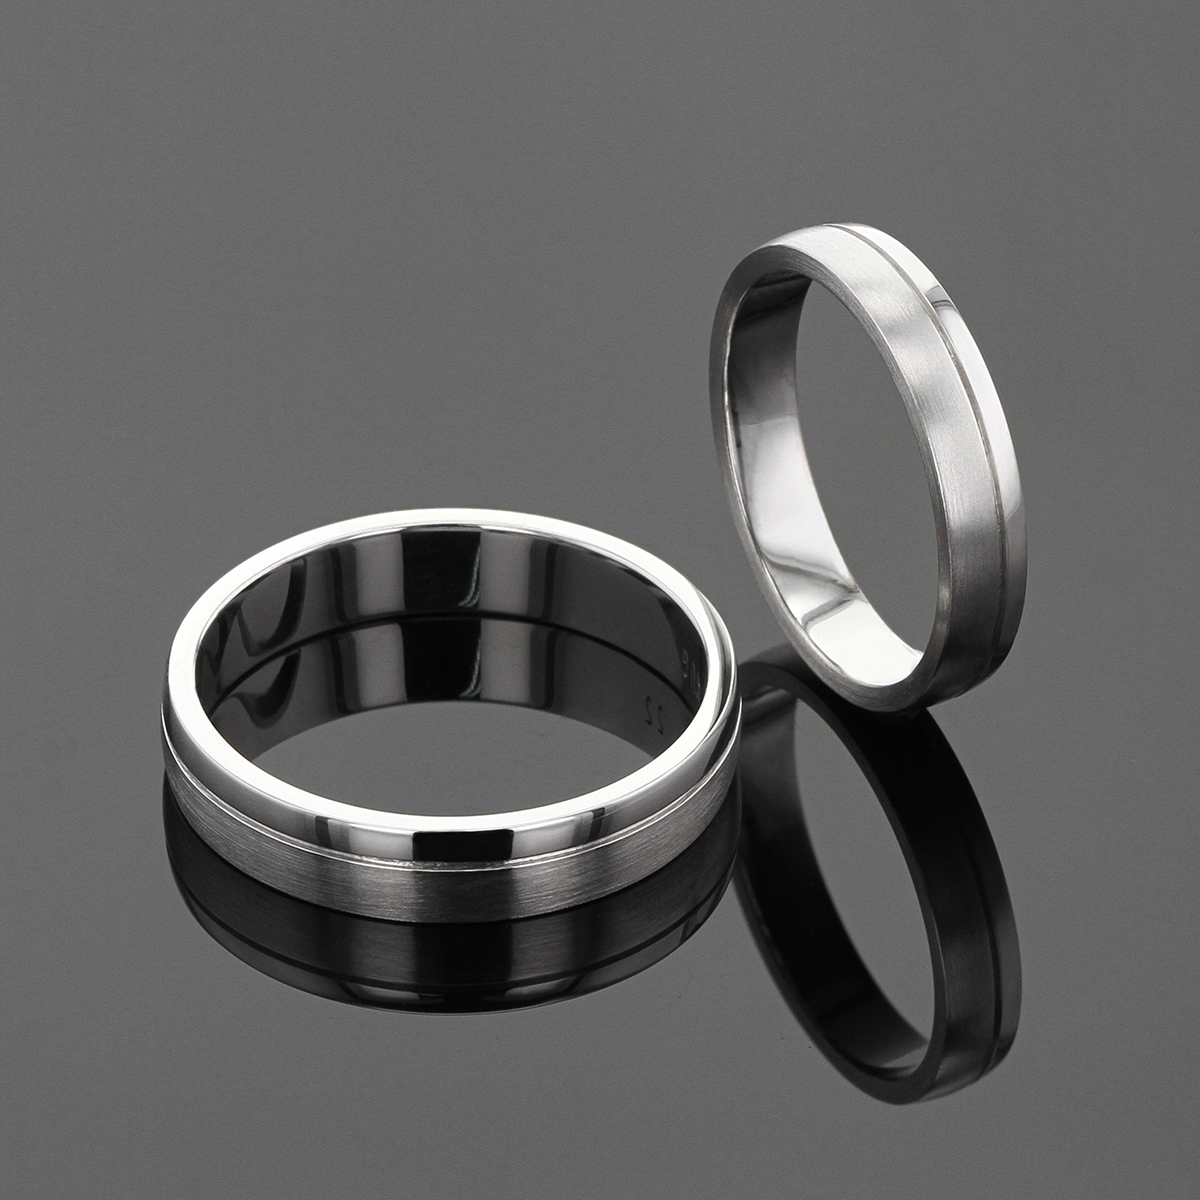 Classic wedding bands in white gold with a fine line that seperates a third of each ring in a matted finish to the contrasting one third in a polished finish.